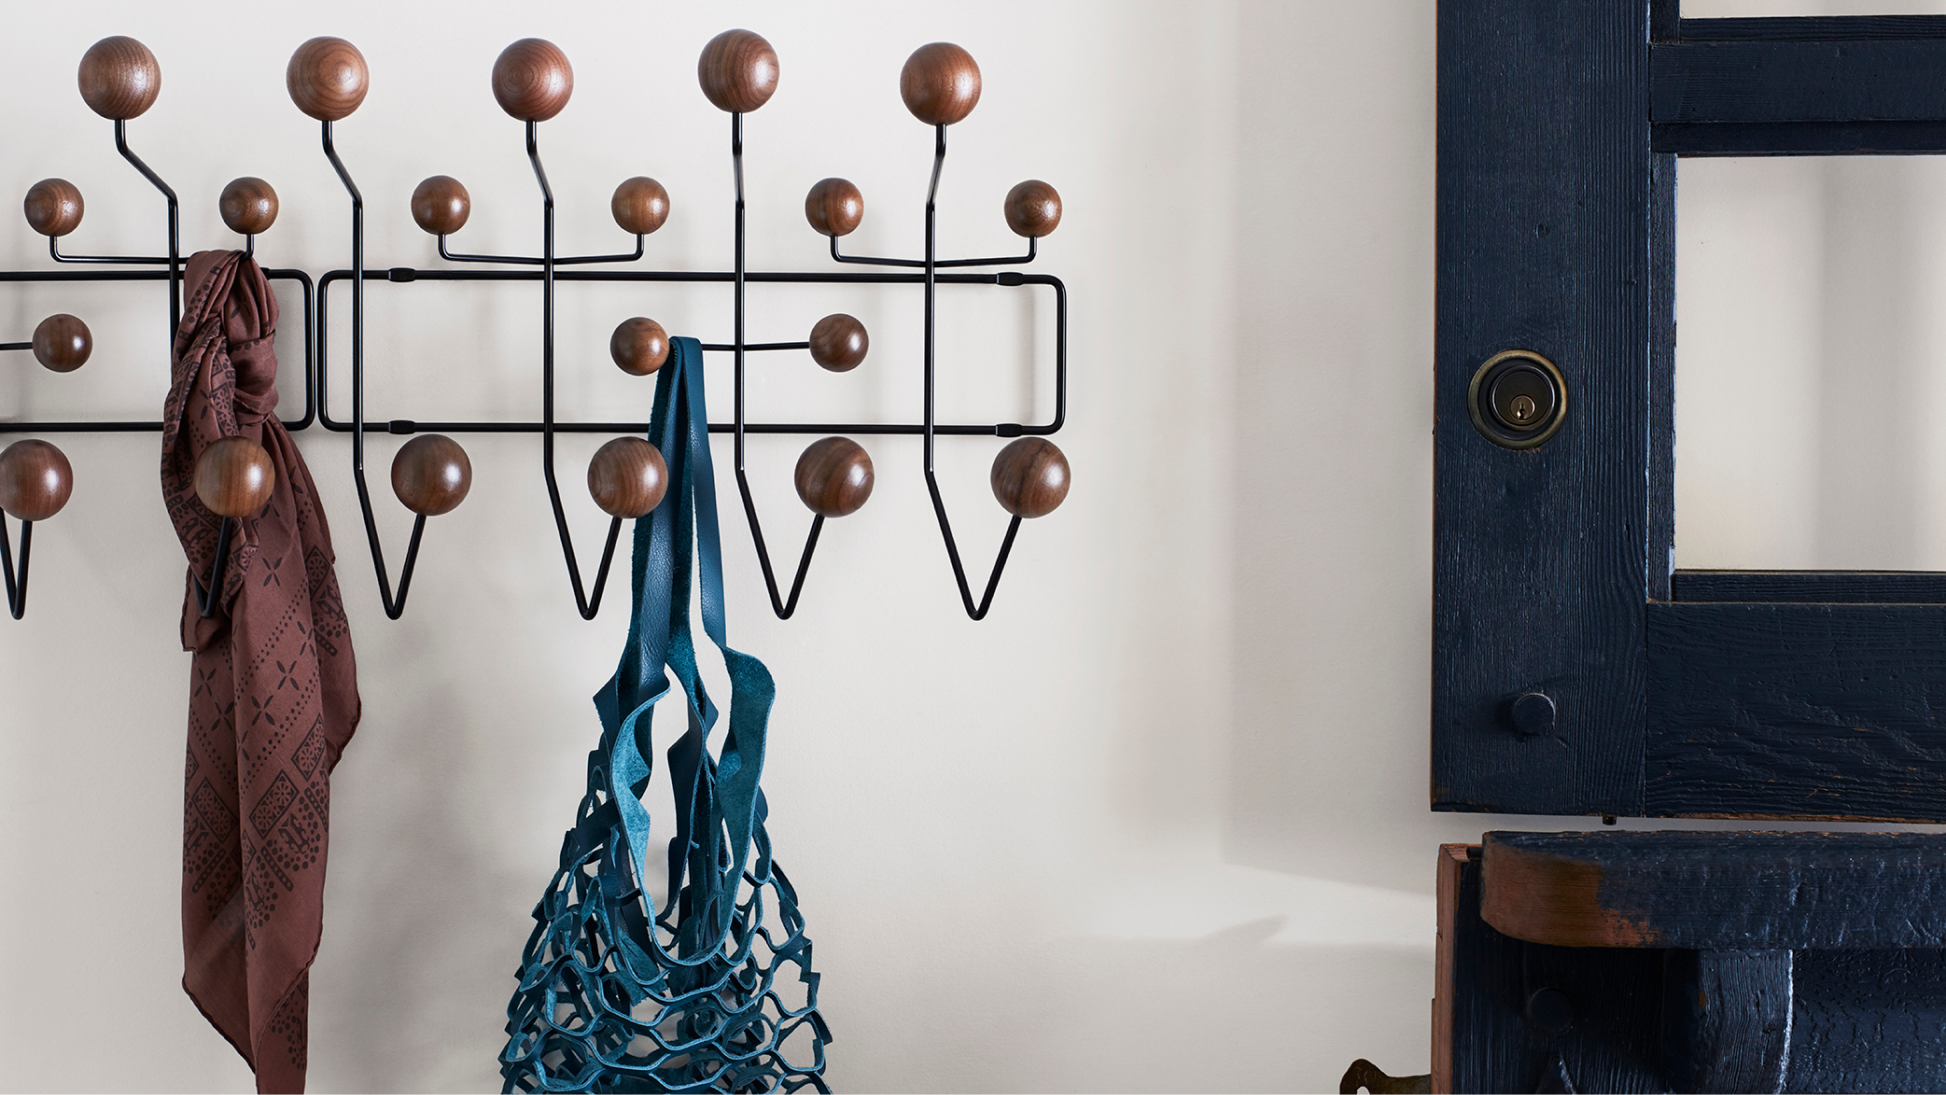 Charles and Ray Eames brought a sense of fun to midcentury design, imbuing everyday objects with unexpected whimsy. Their Hang-It-All coat rack exemplifies this approach.